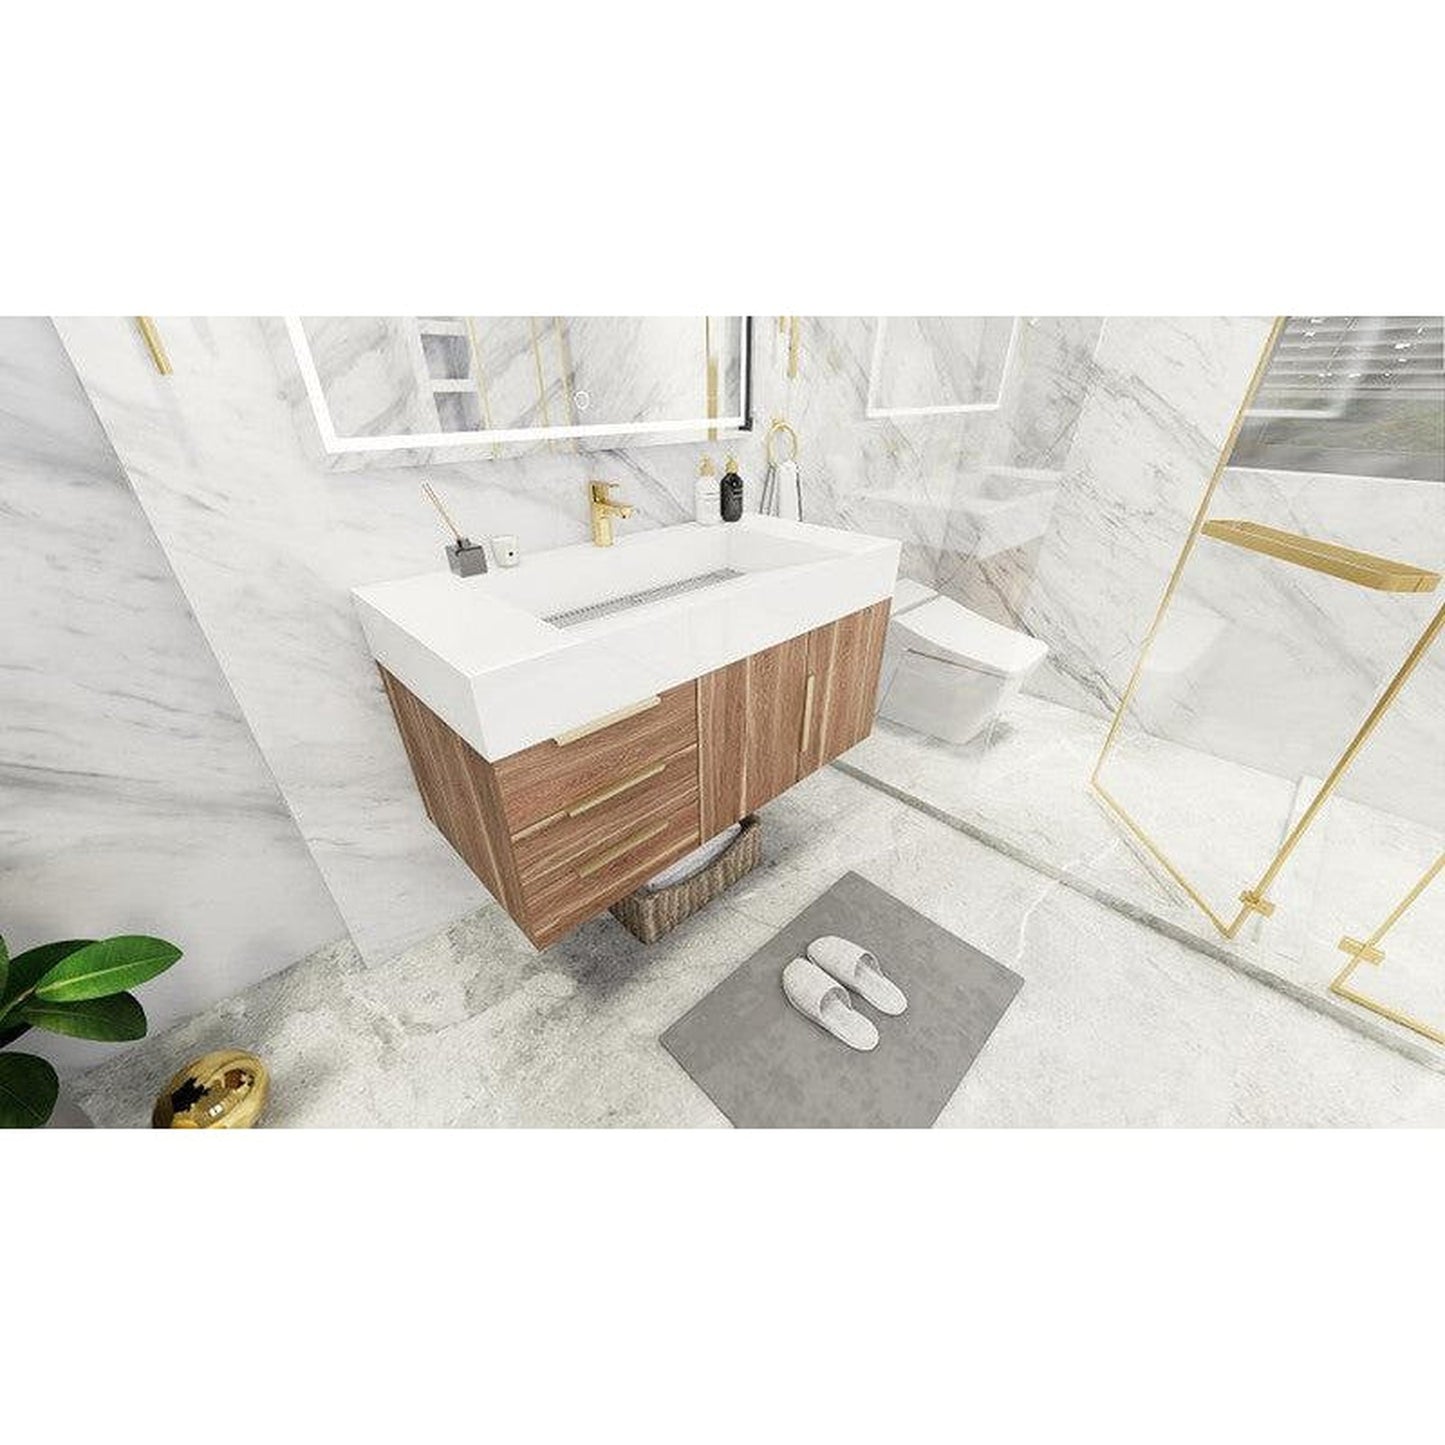 Moreno Bath Bethany 42" White Oak Wall-Mounted Vanity With Left Side Drawers and Single Reinforced White Acrylic Sink